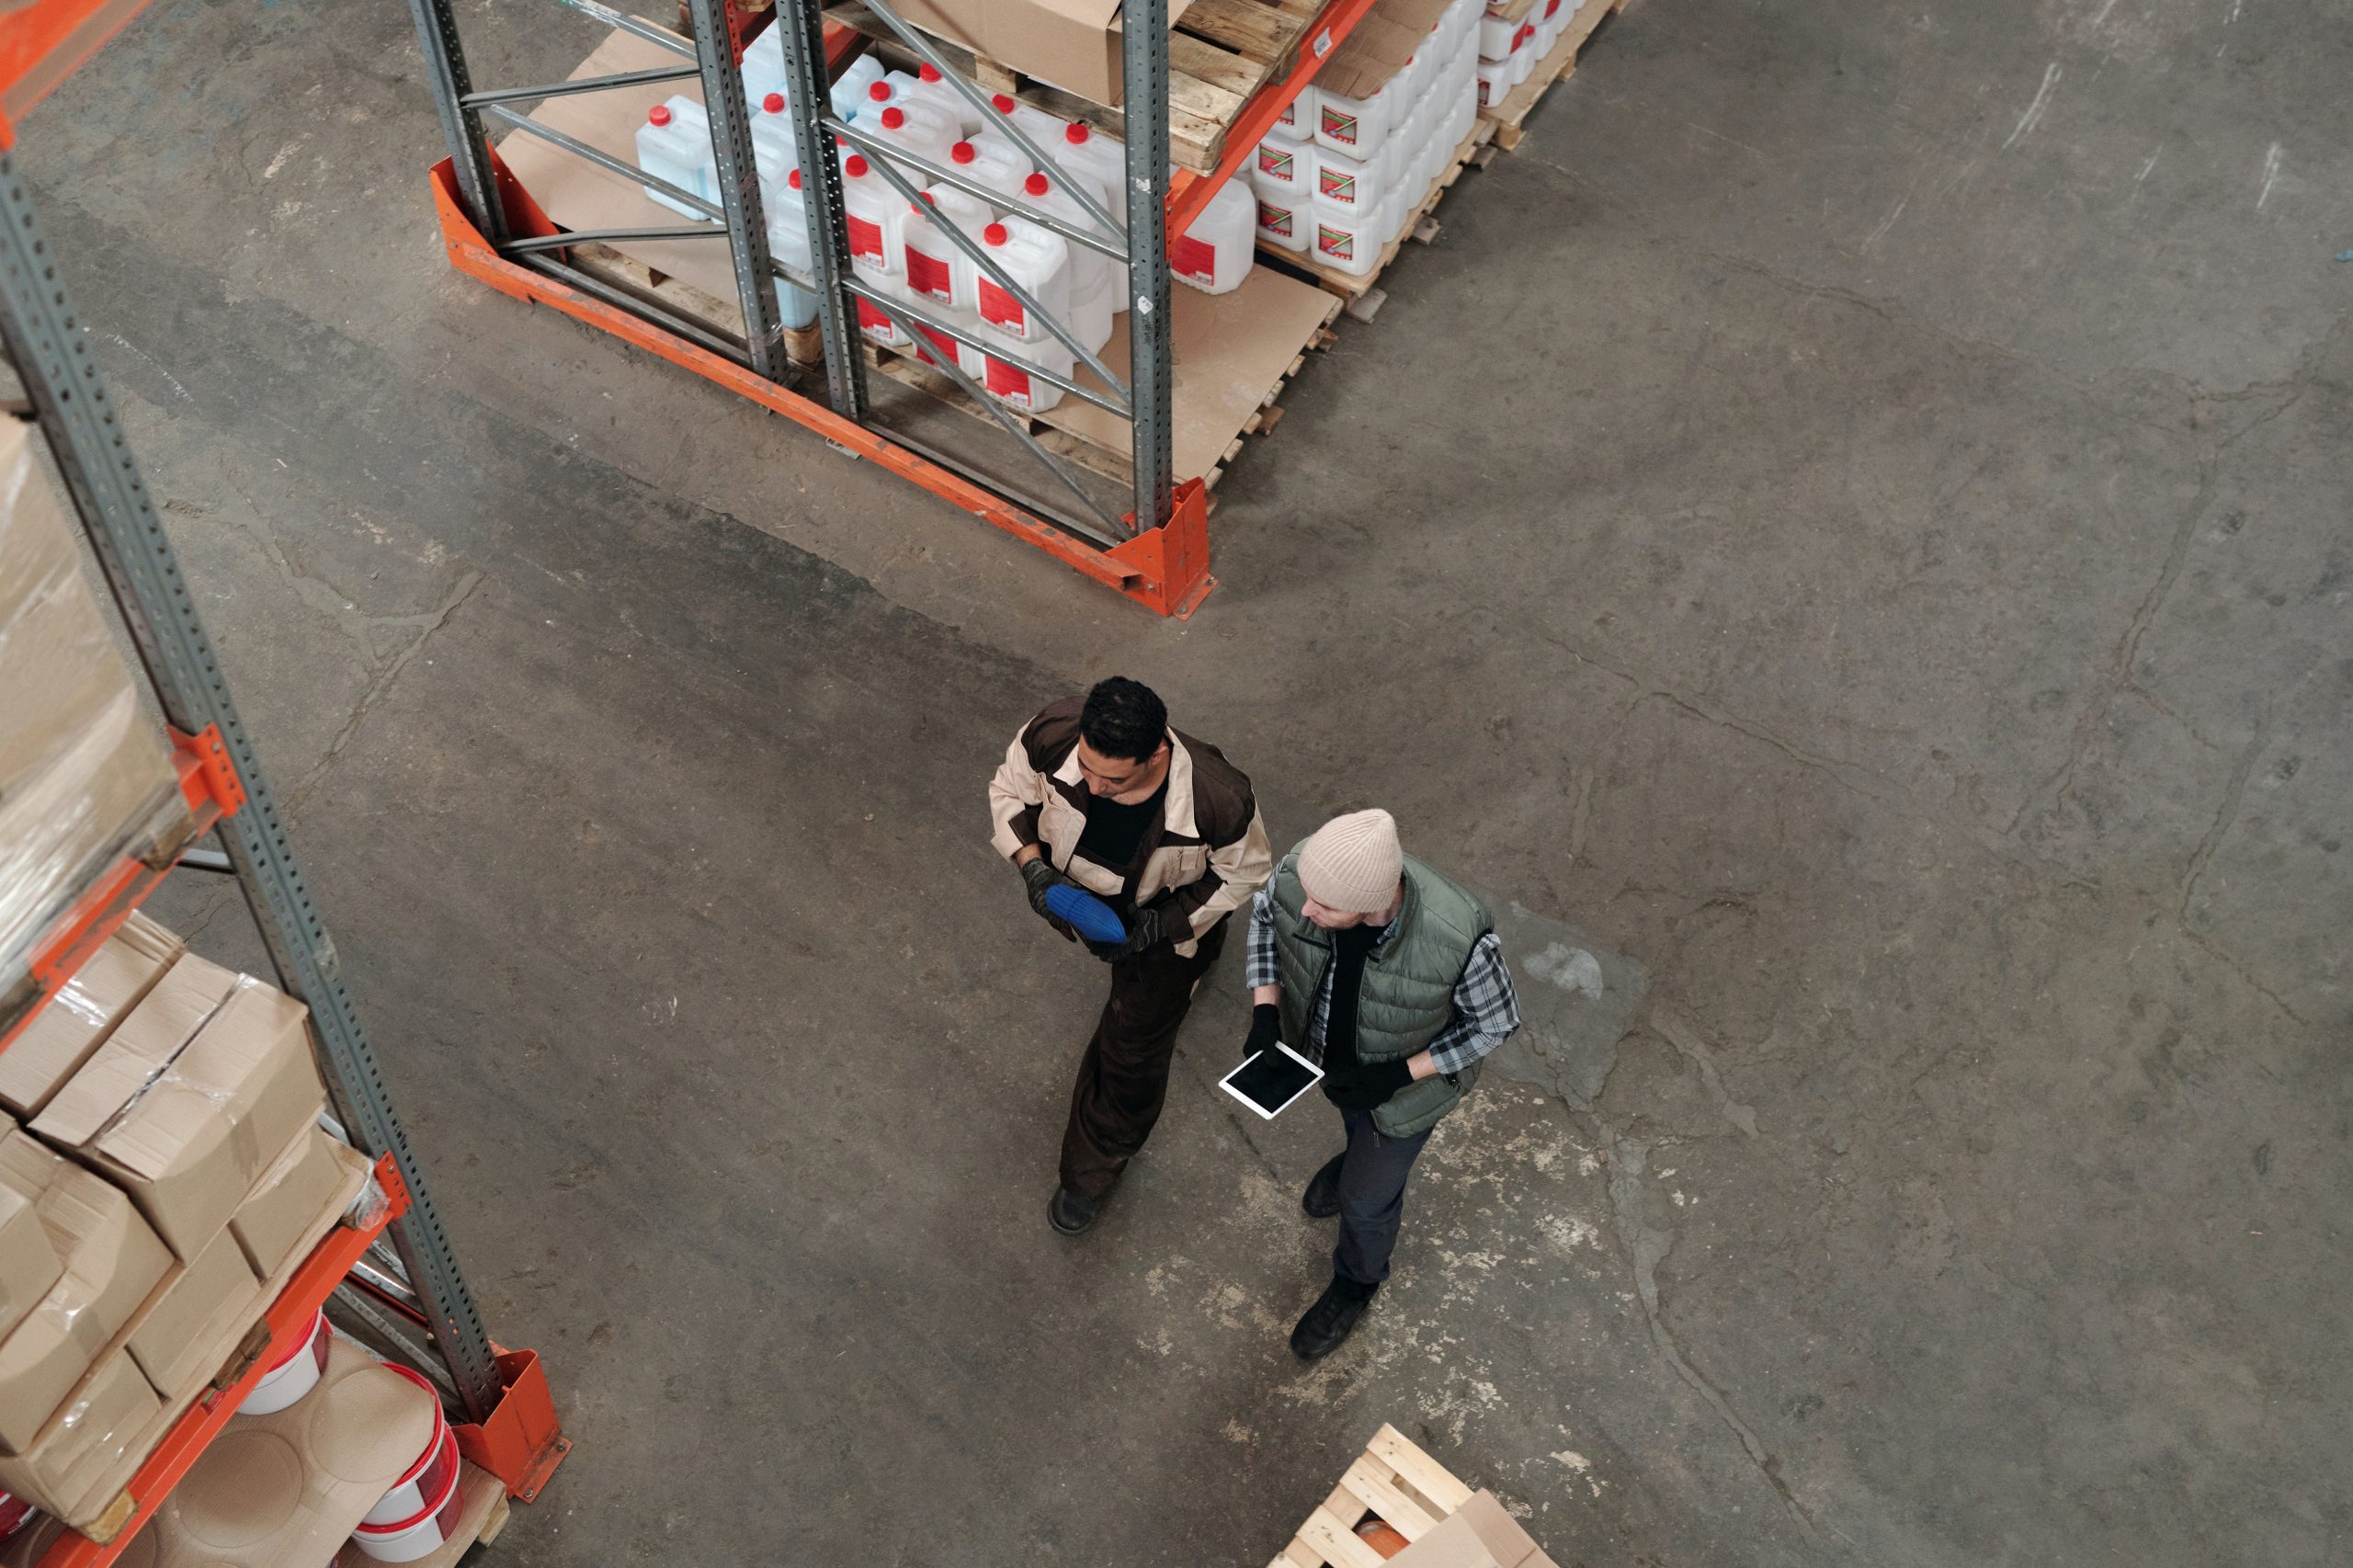 Two men walking through a distribution warehouse working on mobile tablets